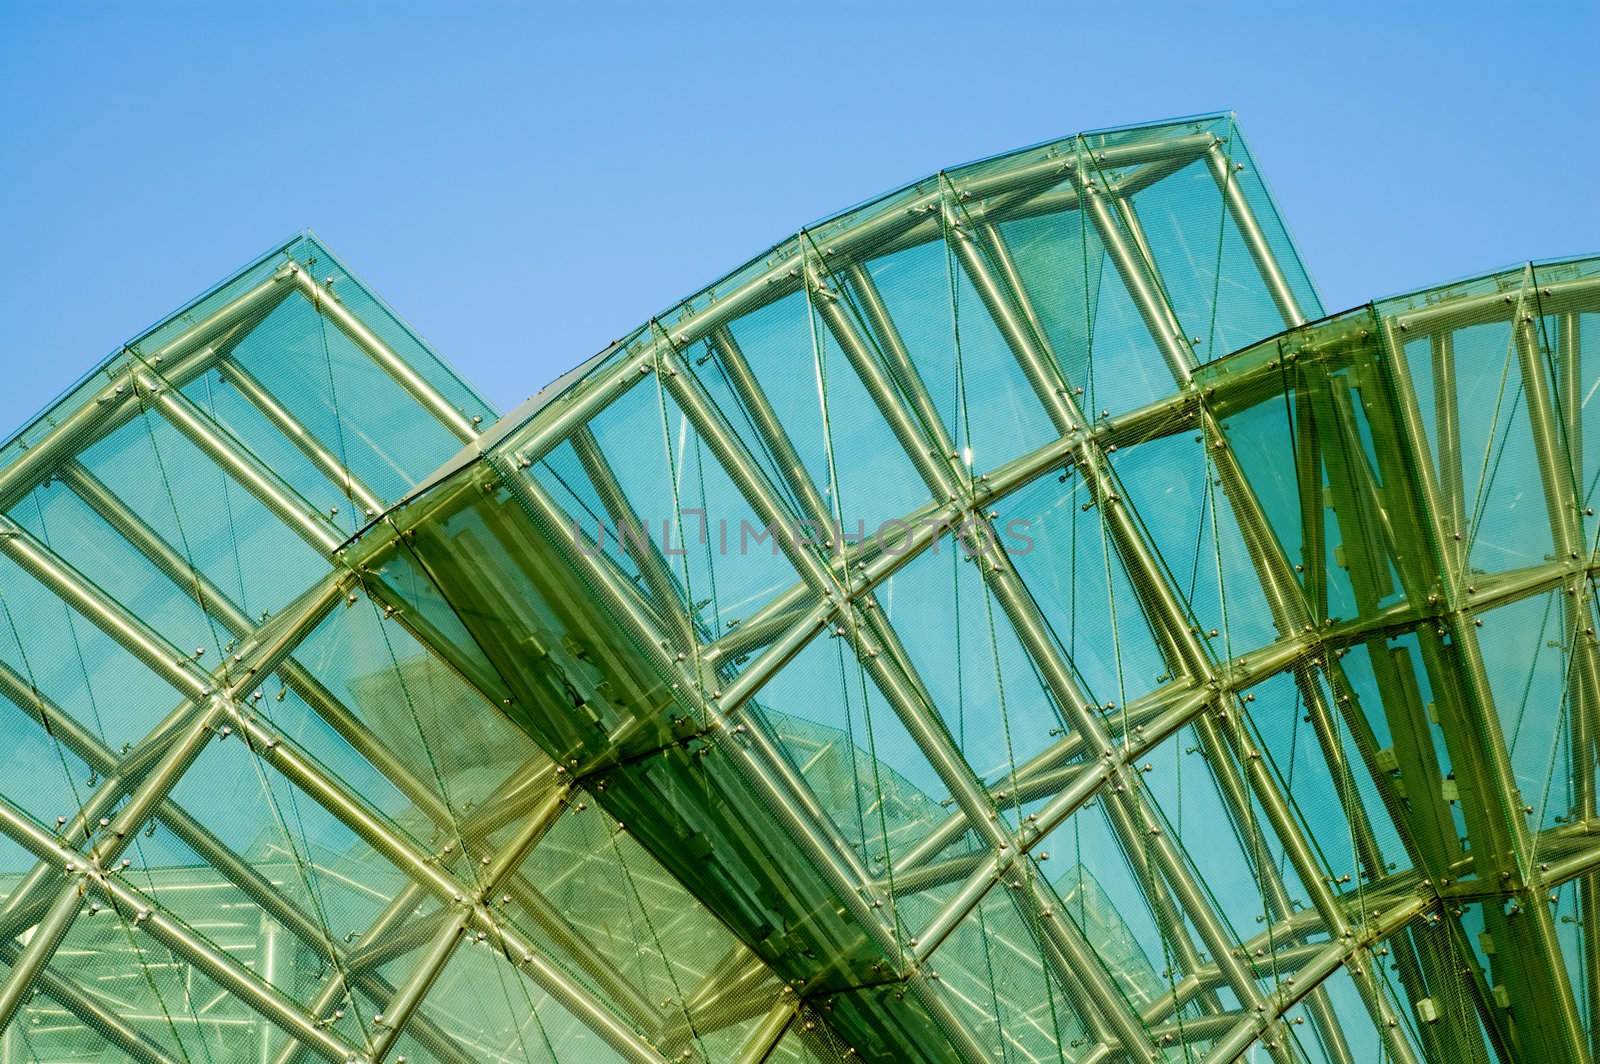 Abstract green glass of petals of lotus shaped architecture